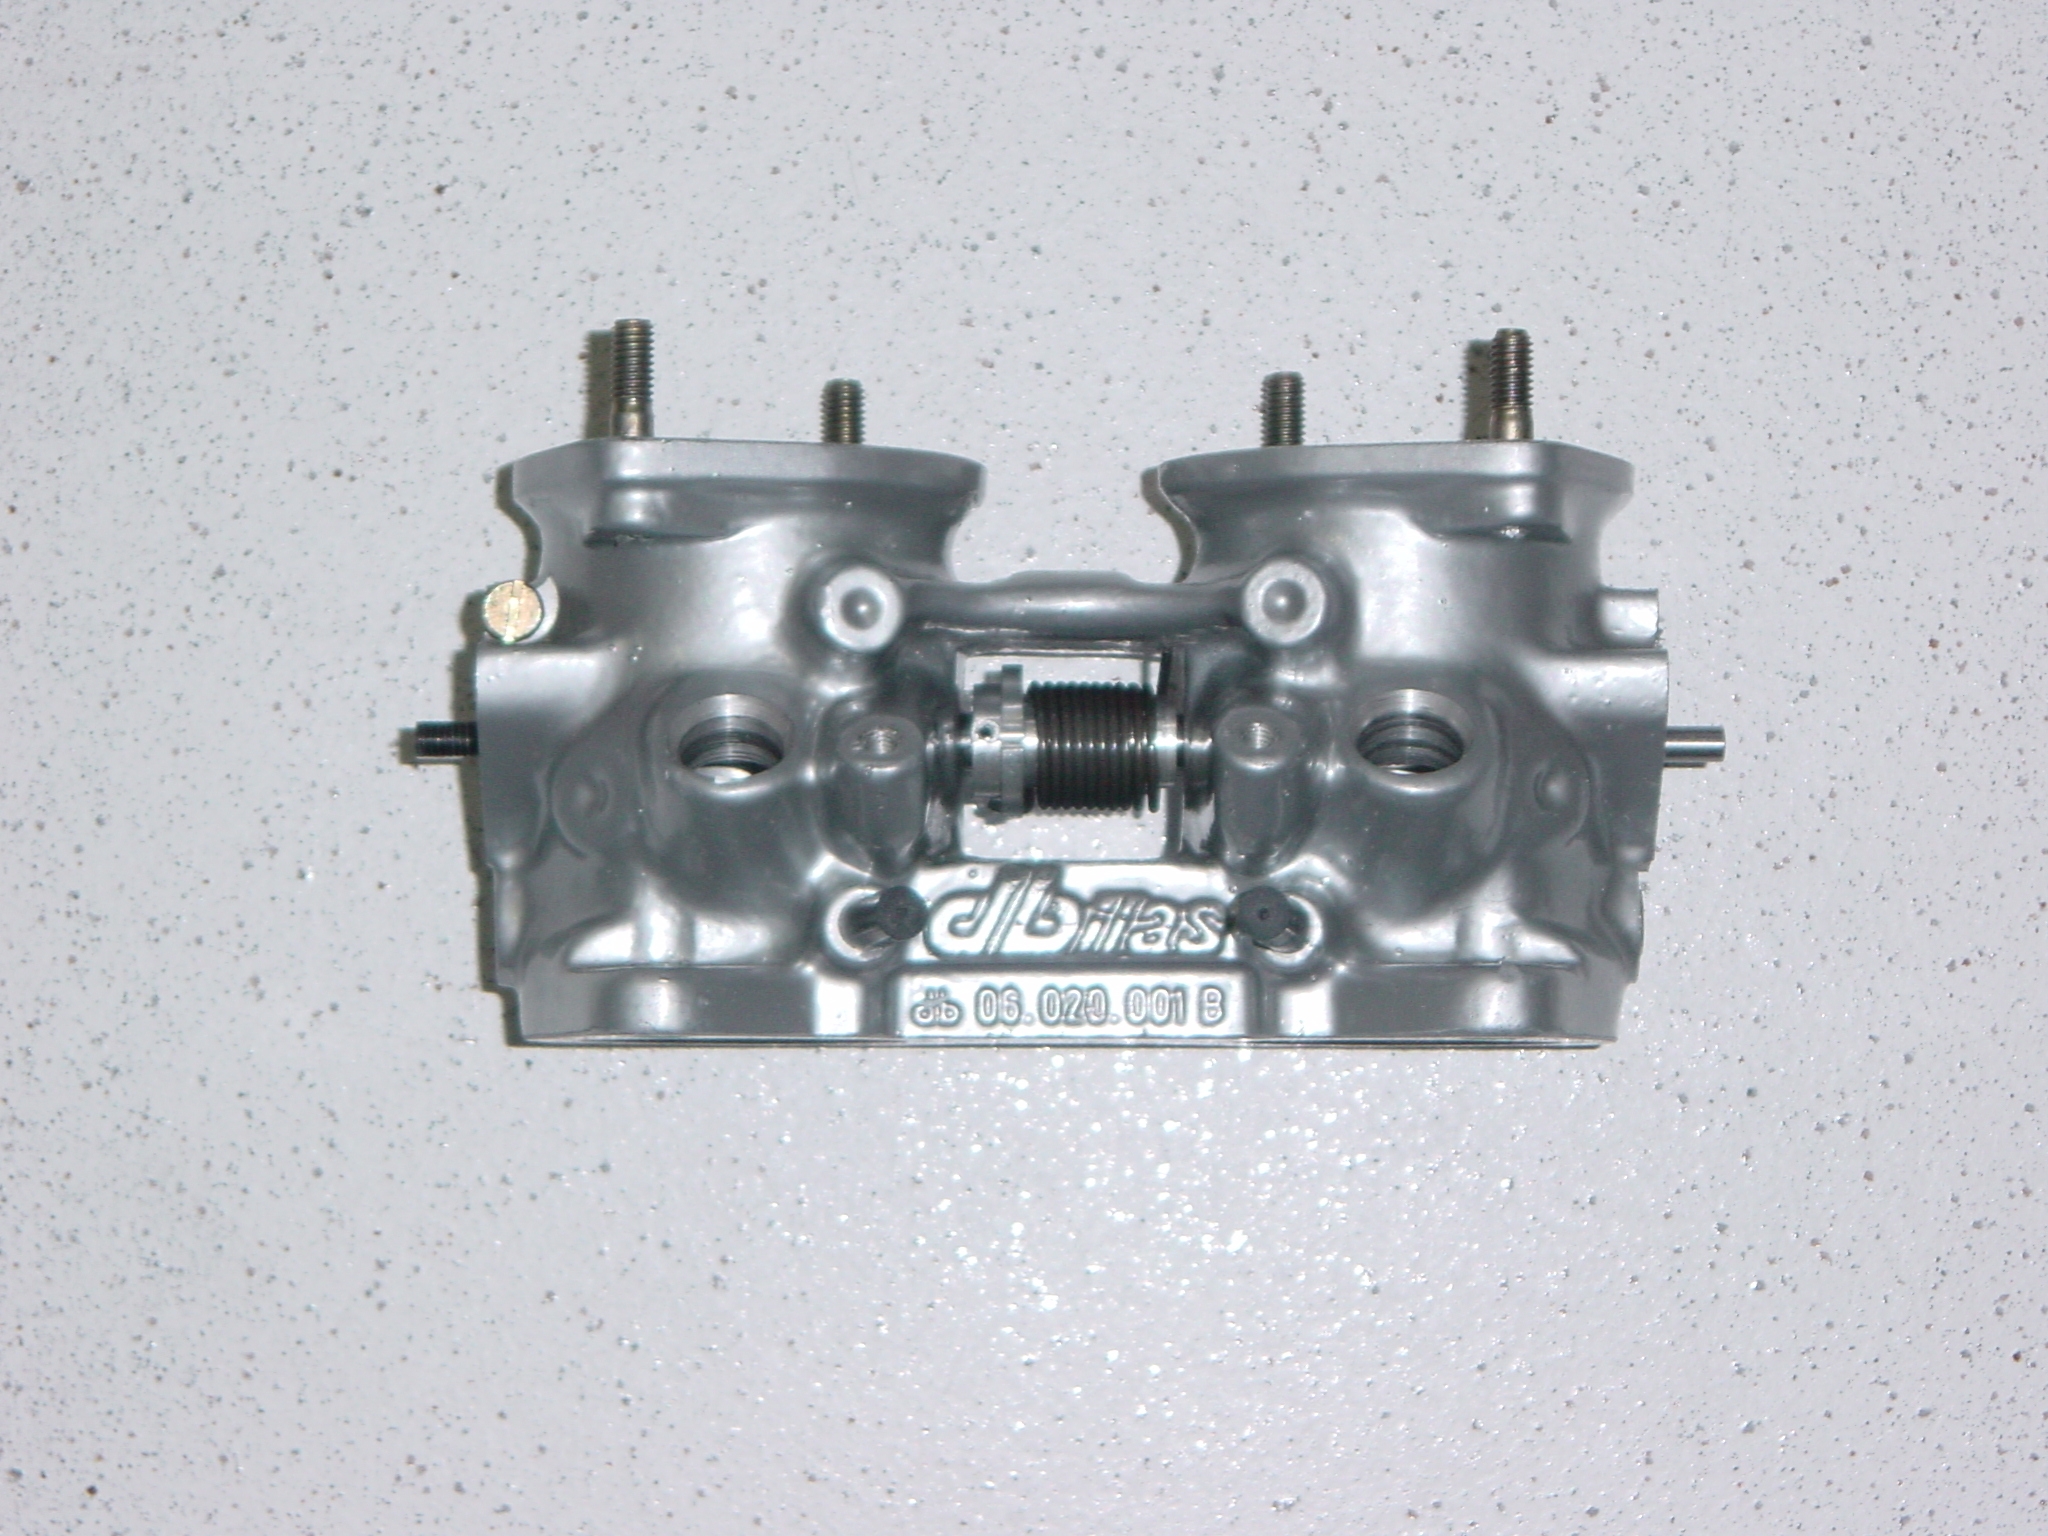 Throttle bodies 48 mm  Diameter: 48mm / Leight: 80mm  with Flange / without Drill holes